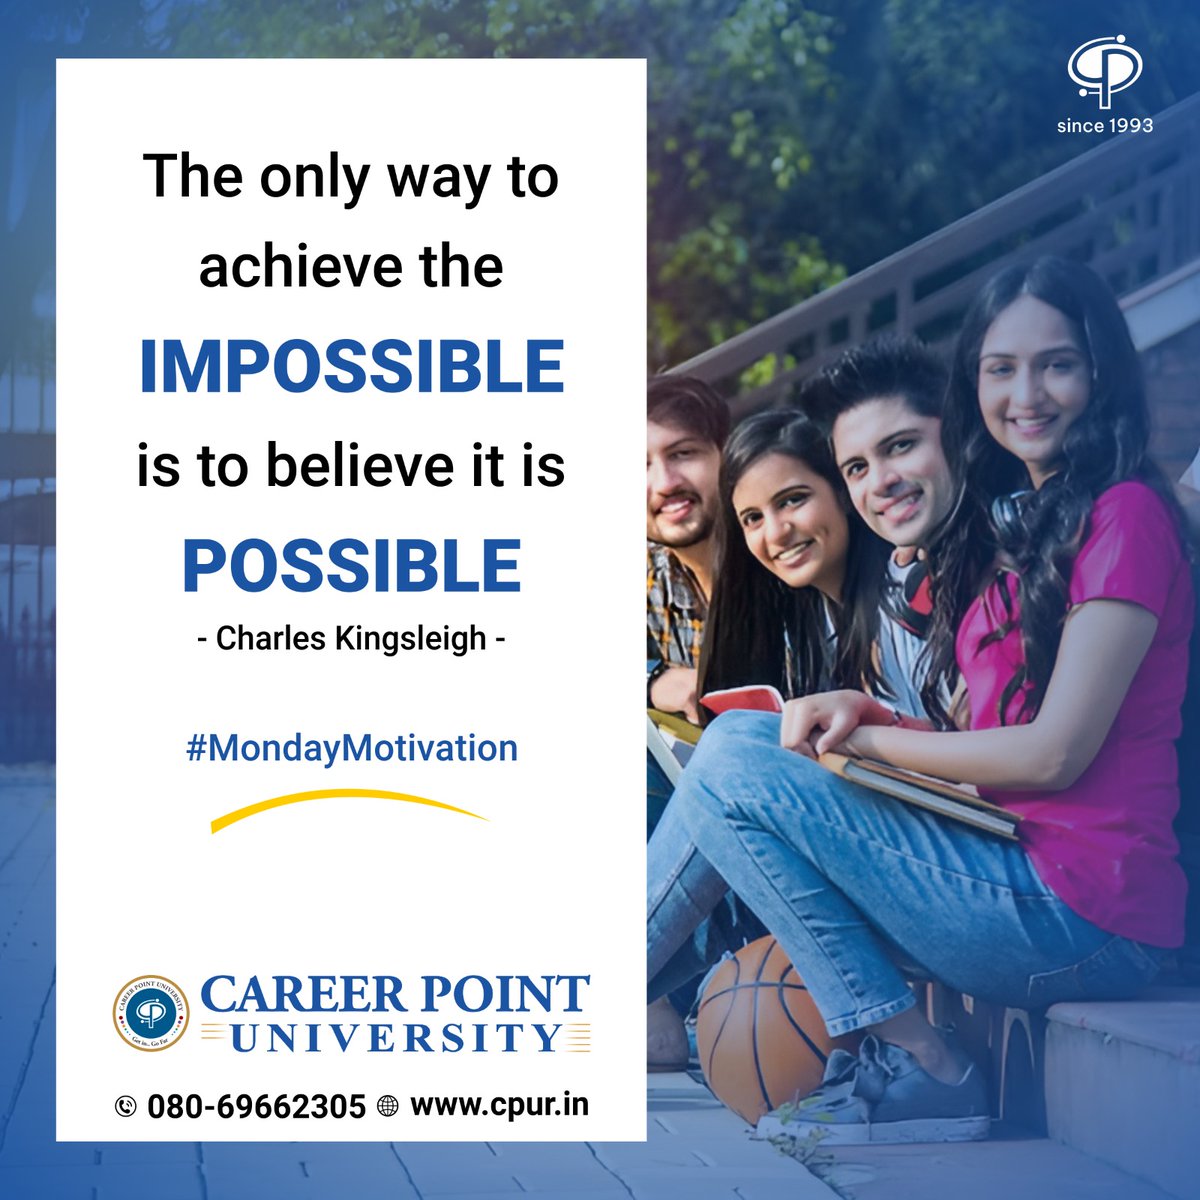 🌟 Embrace the power of possibility! 💪
💪✨📚 Let's kick off the week with some #MondayMotivation from Career Point University: 'The only way to achieve the impossible is to believe it is possible.' 💡✨ 

#CareerPointUniversity #CPUniversity #MondayMotivation #BelieveInYourself